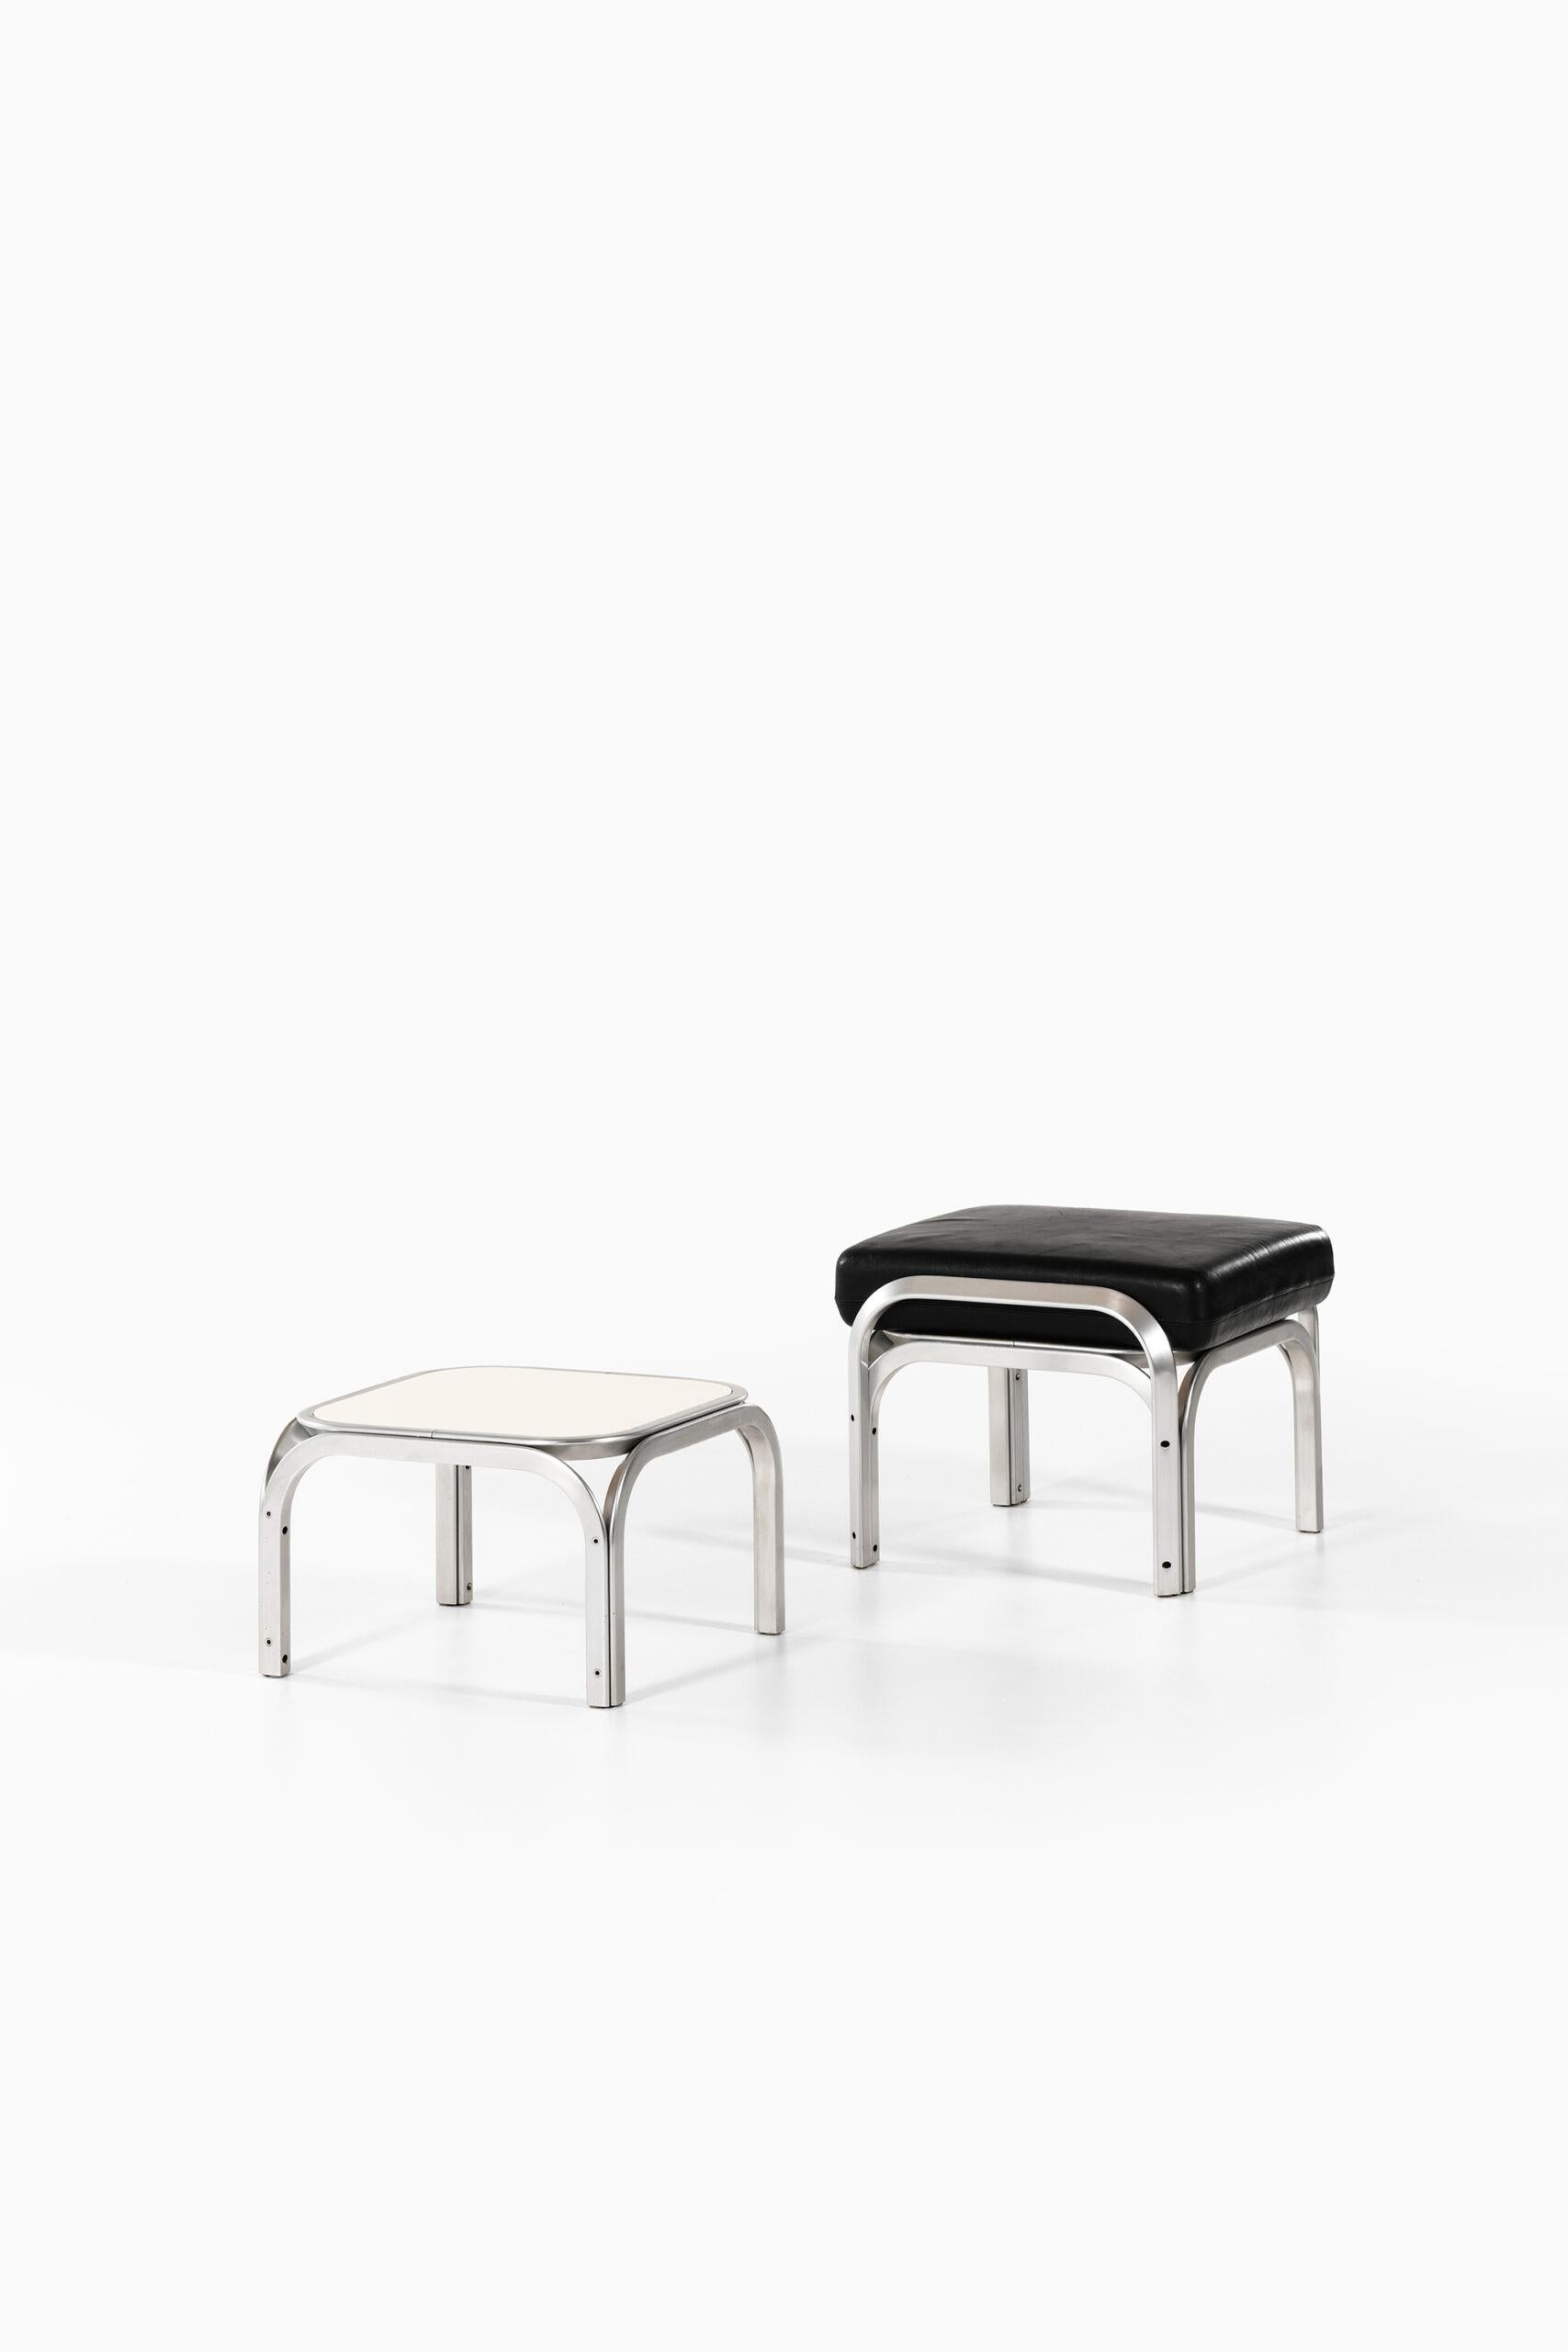 Jørn Utzon Seating Group Produced by Fritz Hansen For Sale 2